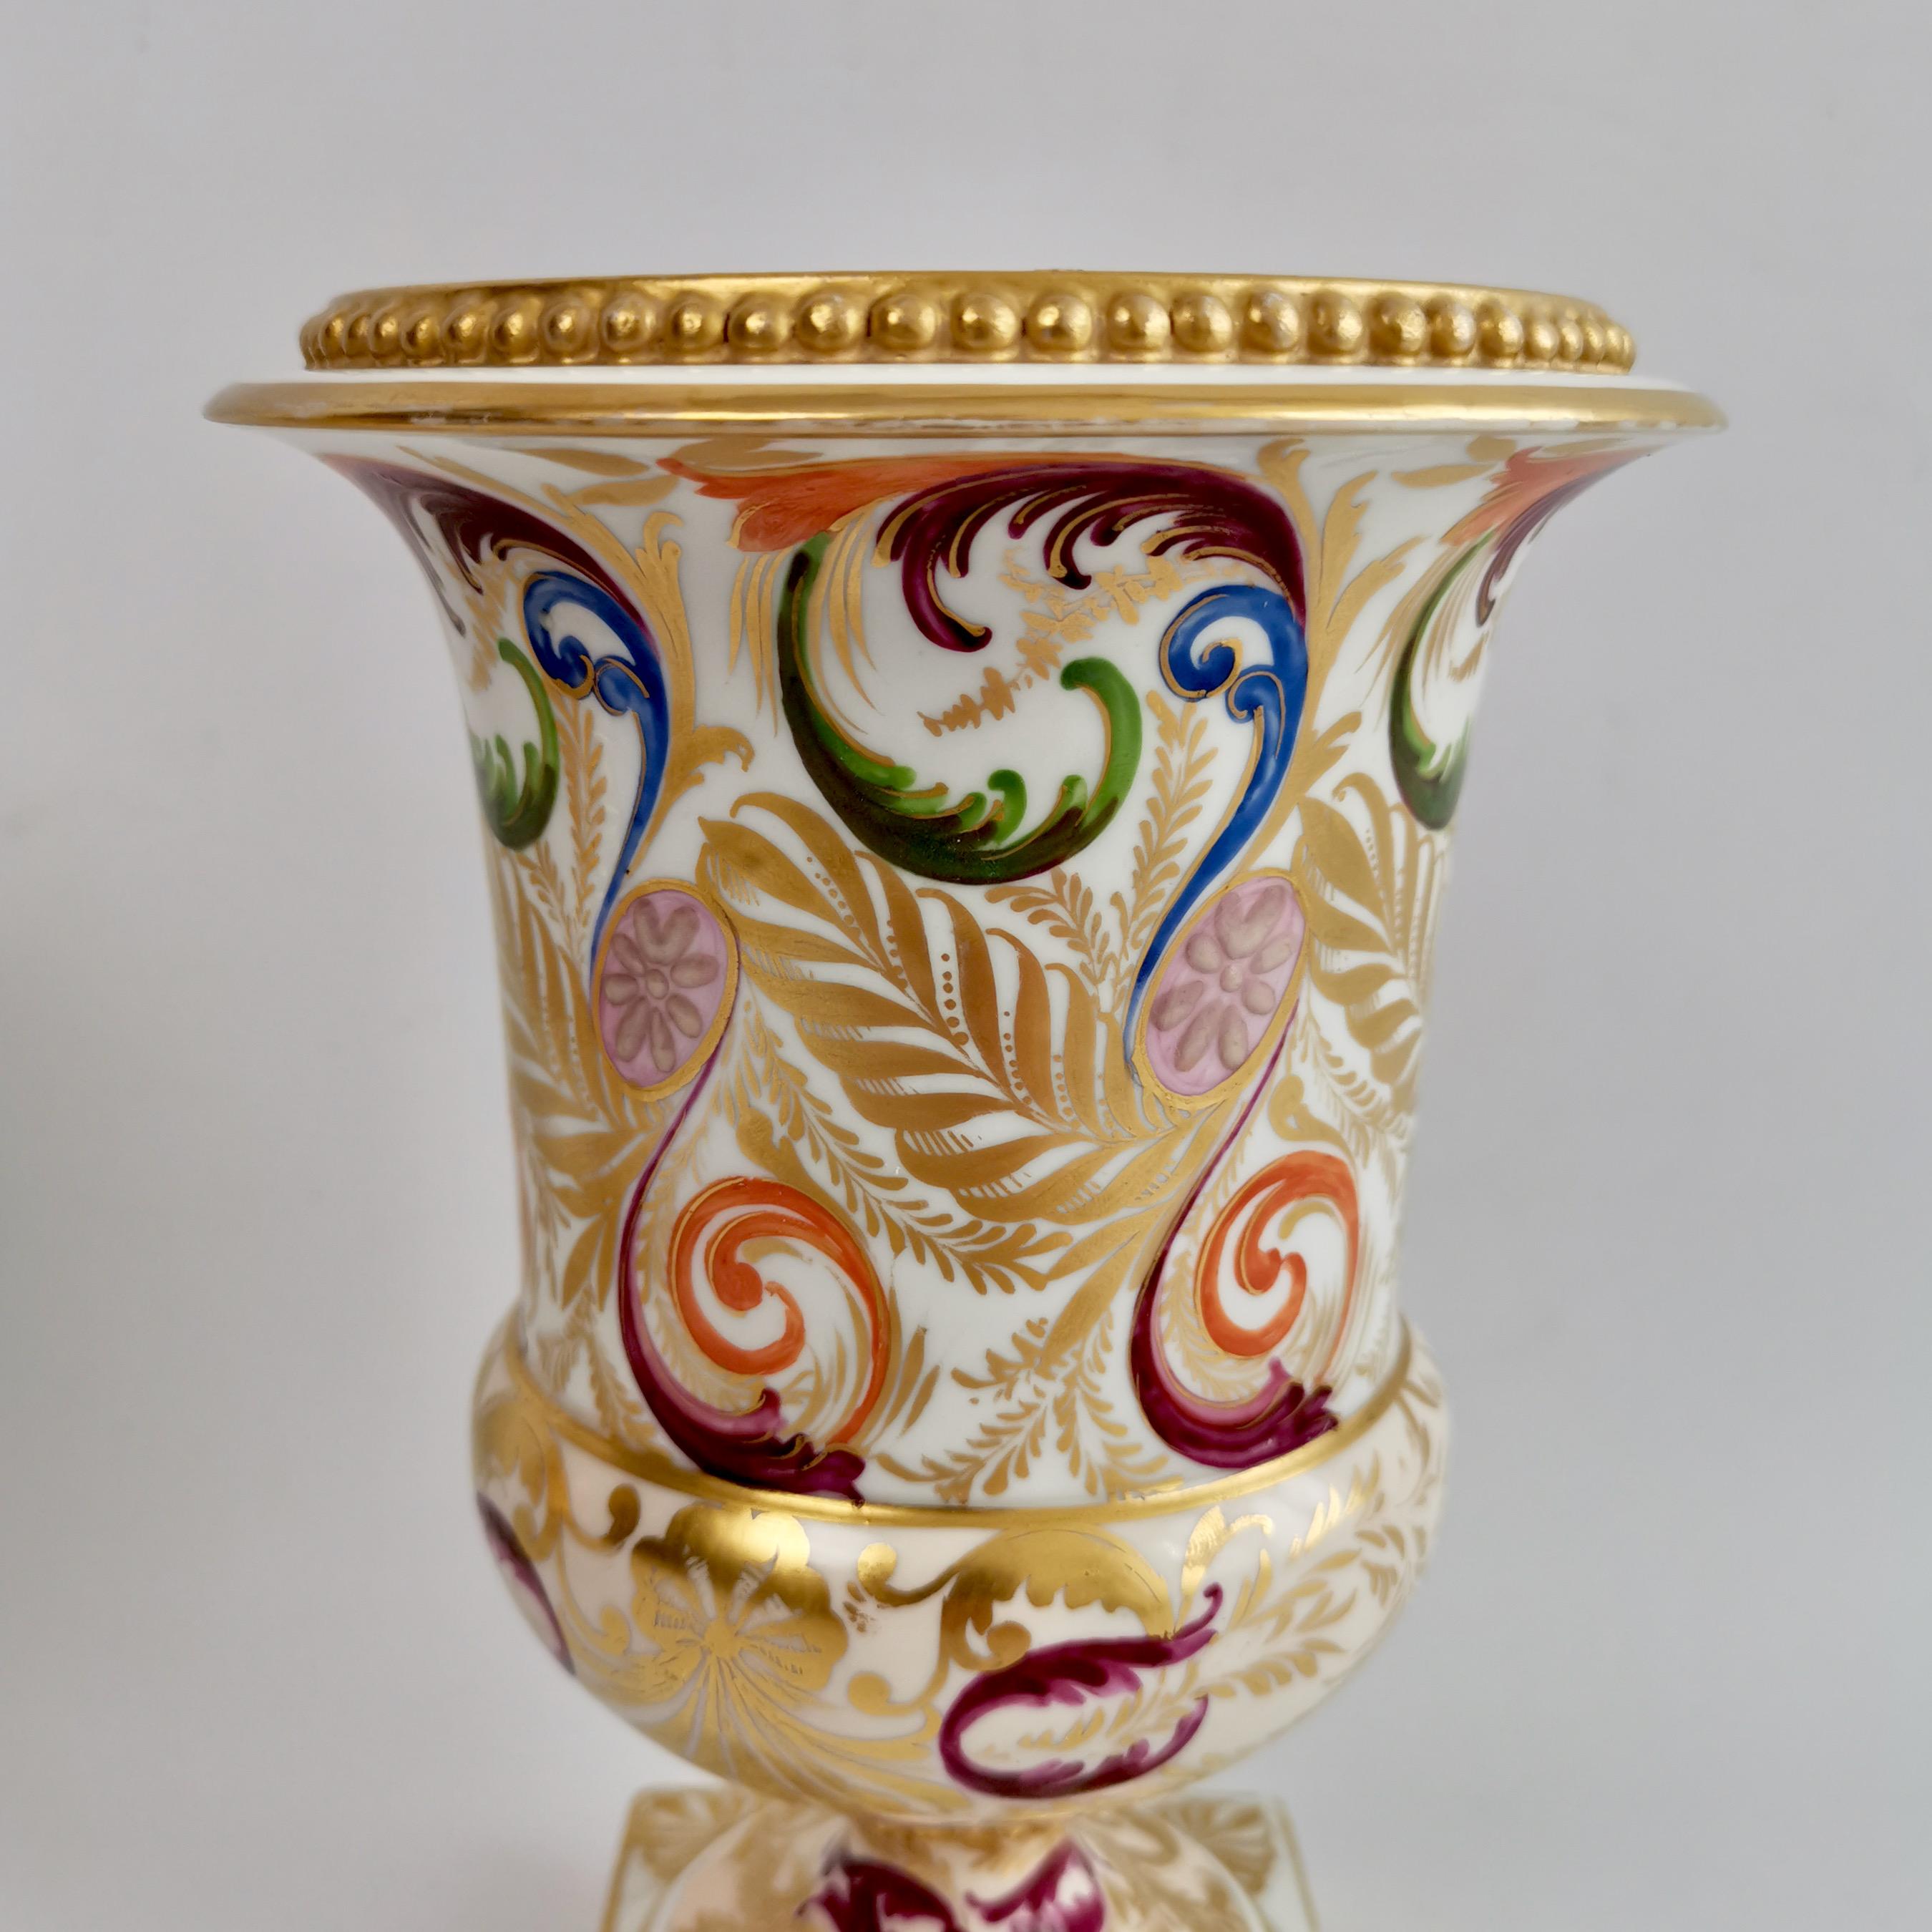 Early 19th Century Pair of Bloor Derby Porcelain Campana Vases, Polychrome Regency Pattern, ca 1815